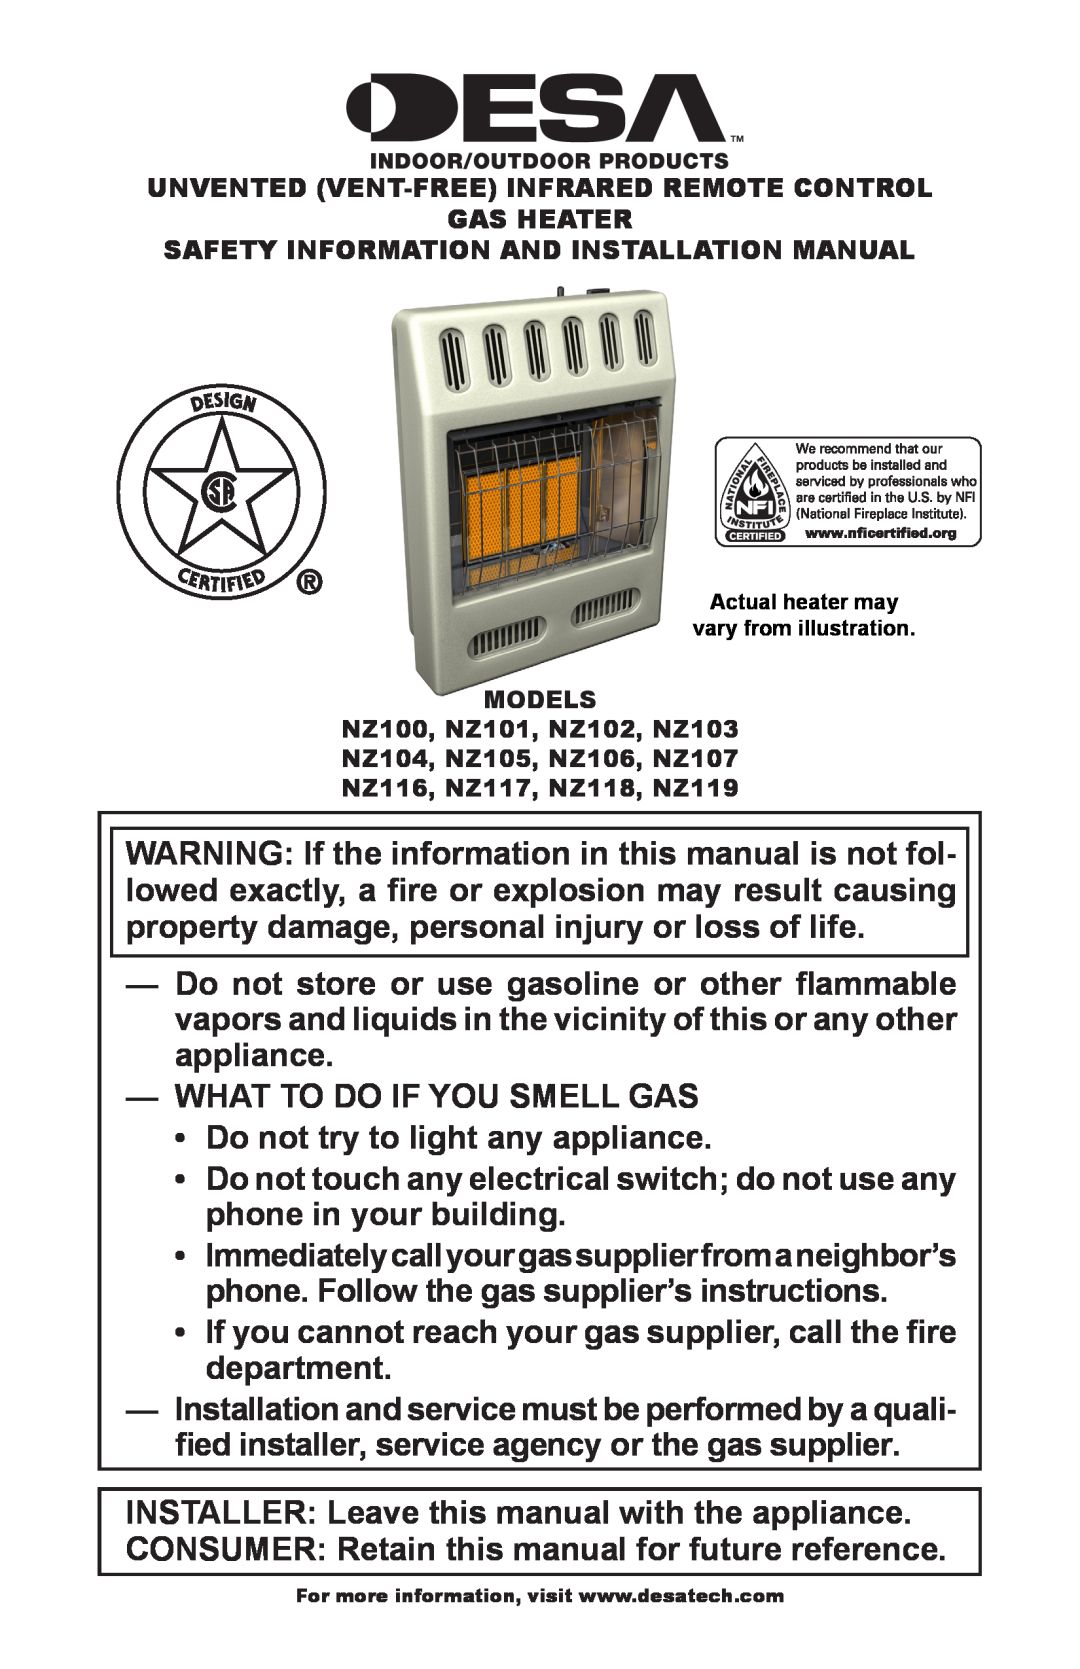 Desa NZ118, NZ119, NZ107 NZ116, NZ100, NZ105, NZ102, NZ101, NZ103 NZ104, NZ117 installation manual What To Do If You Smell Gas 